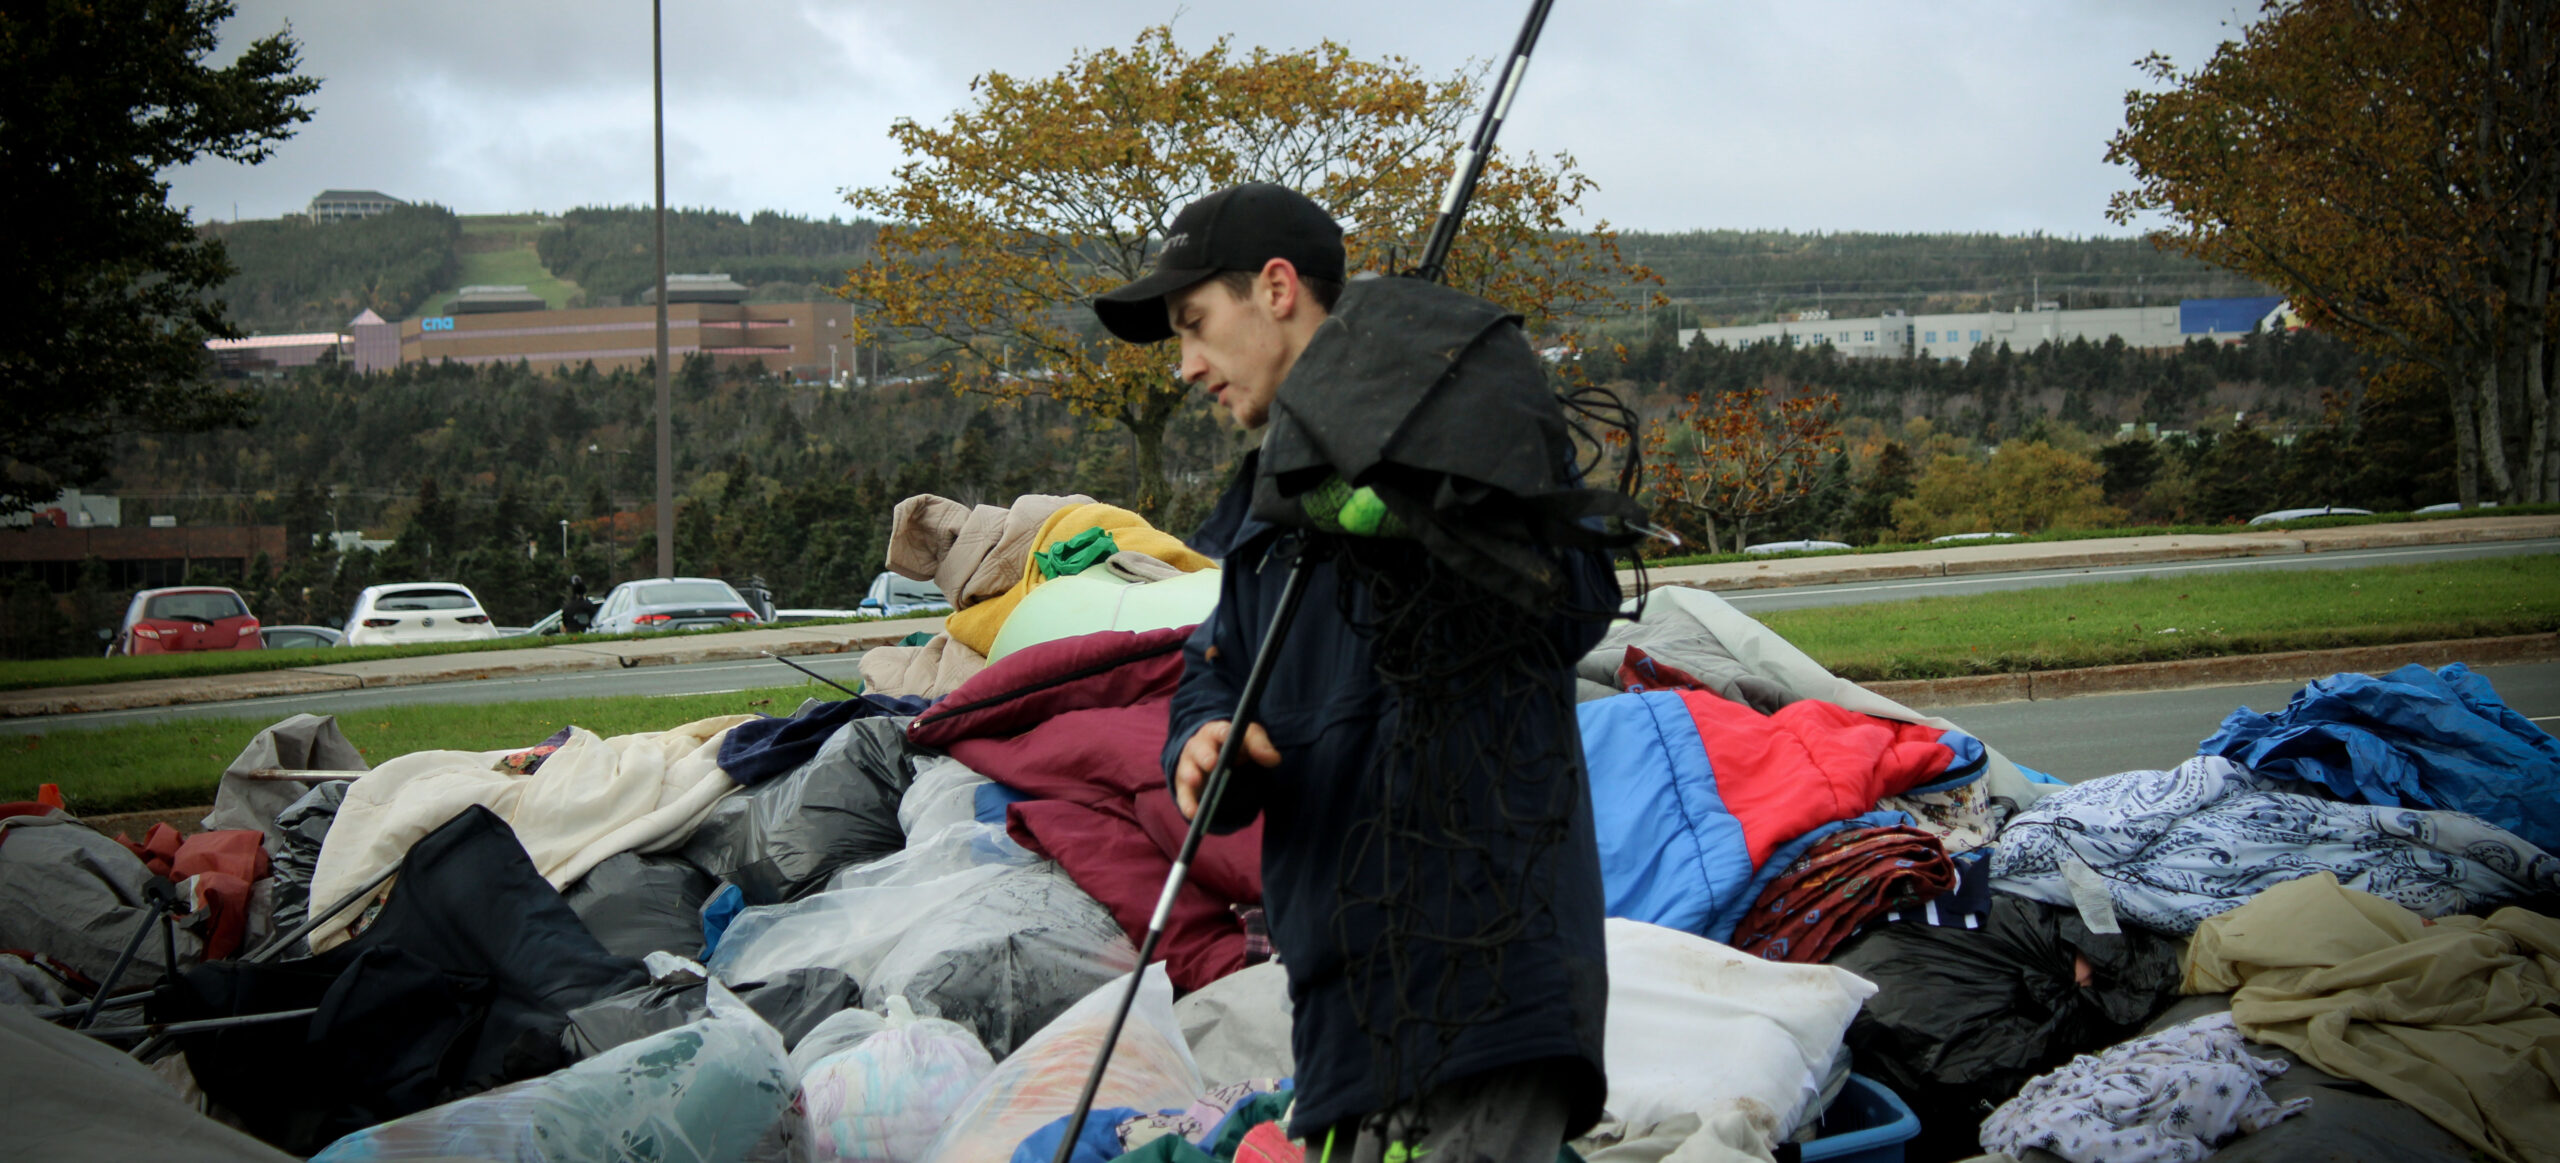 A tent city resident, in a black jacket searches for personal items from a huge pile of debris. The pile has many blankets, clothes as well as tent equipment.